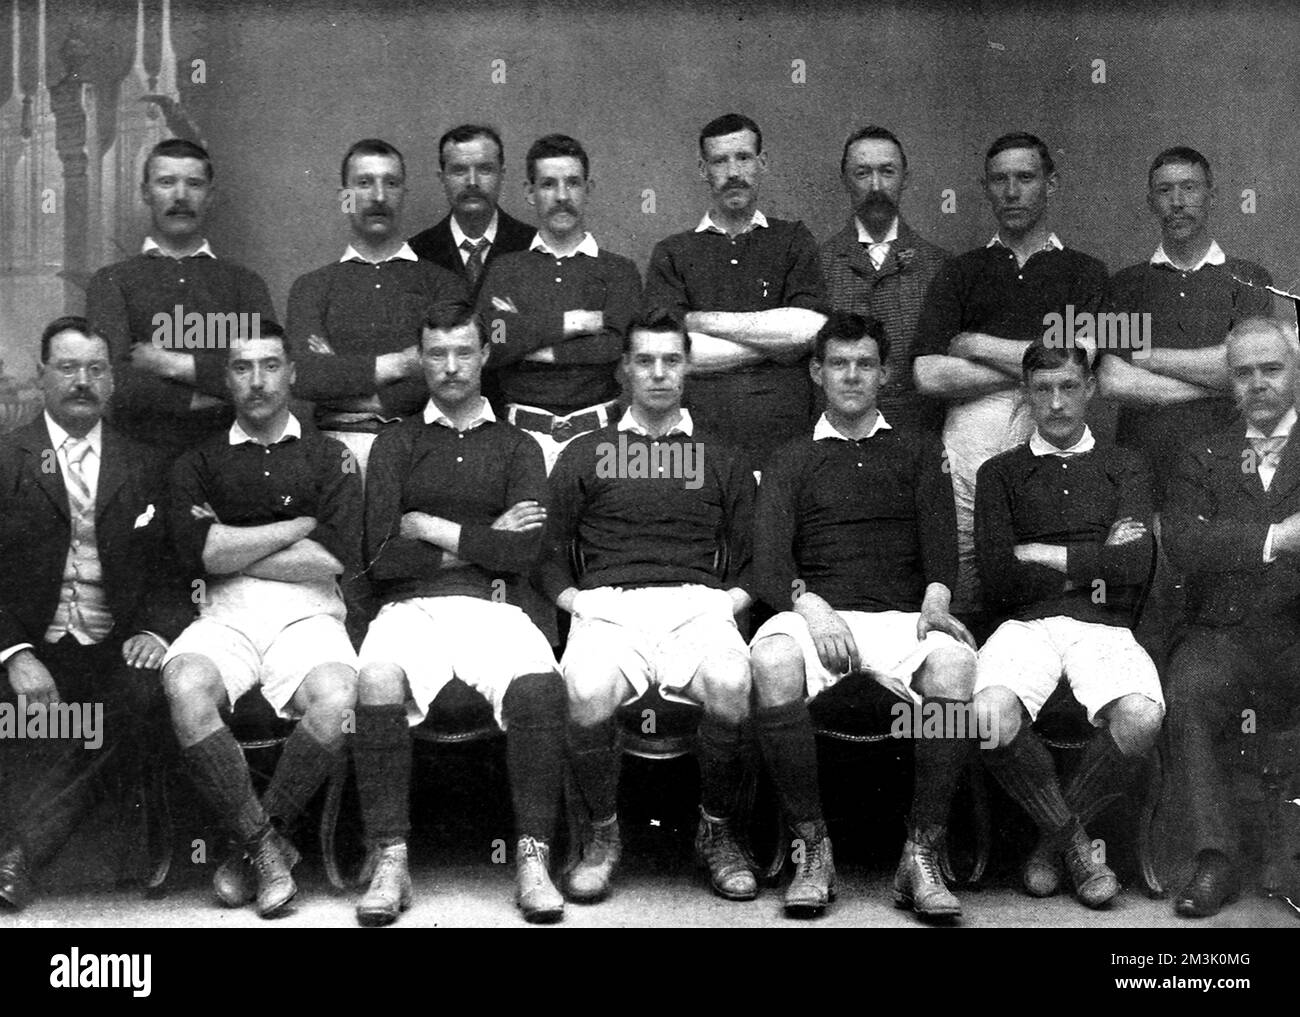 Scotland International Football Team selected for the game against England in 1897. On the 3rd April that year they beat England 2-1 in the British International Championship.  The image shows: Back row, left to right: N. Smith (Rangers), J. Patrick (St. Mirren), J. Aitkin (trainer), J. Bell (Everton), T.Hyslop (Rangers), J.K. McDowall (Secretary of the SFA), G. Allan (Liverpool), H. Wilson (Sunderland). Front row, left to right: W. Crichton (President of the SFA), J. Cowan (Aston Villa), J. Miller (Rangers), W.A. Lambie (Queen's Park), D.Doyle (Celtic), N. Gibson (Rangers), D. McKenzie (Vice Stock Photo